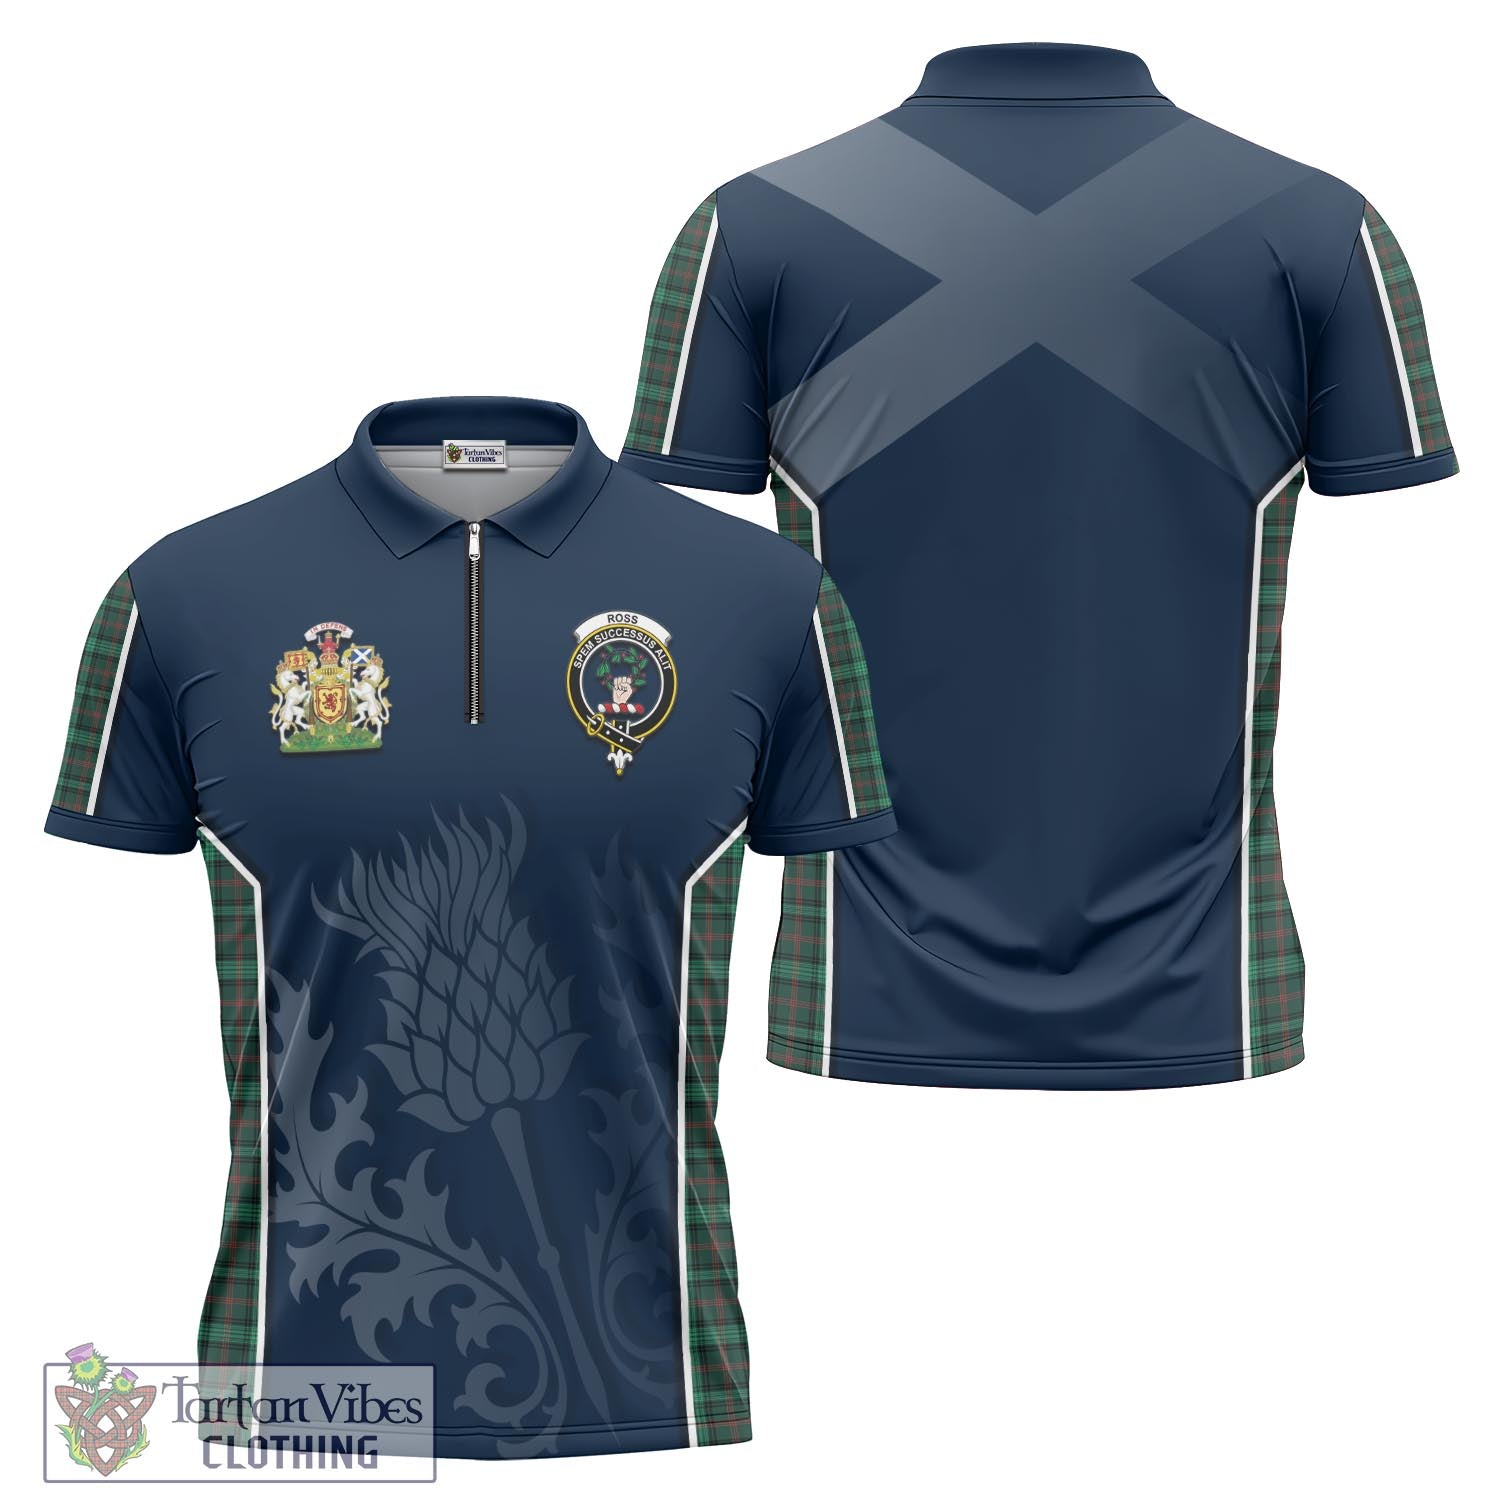 Tartan Vibes Clothing Ross Hunting Modern Tartan Zipper Polo Shirt with Family Crest and Scottish Thistle Vibes Sport Style